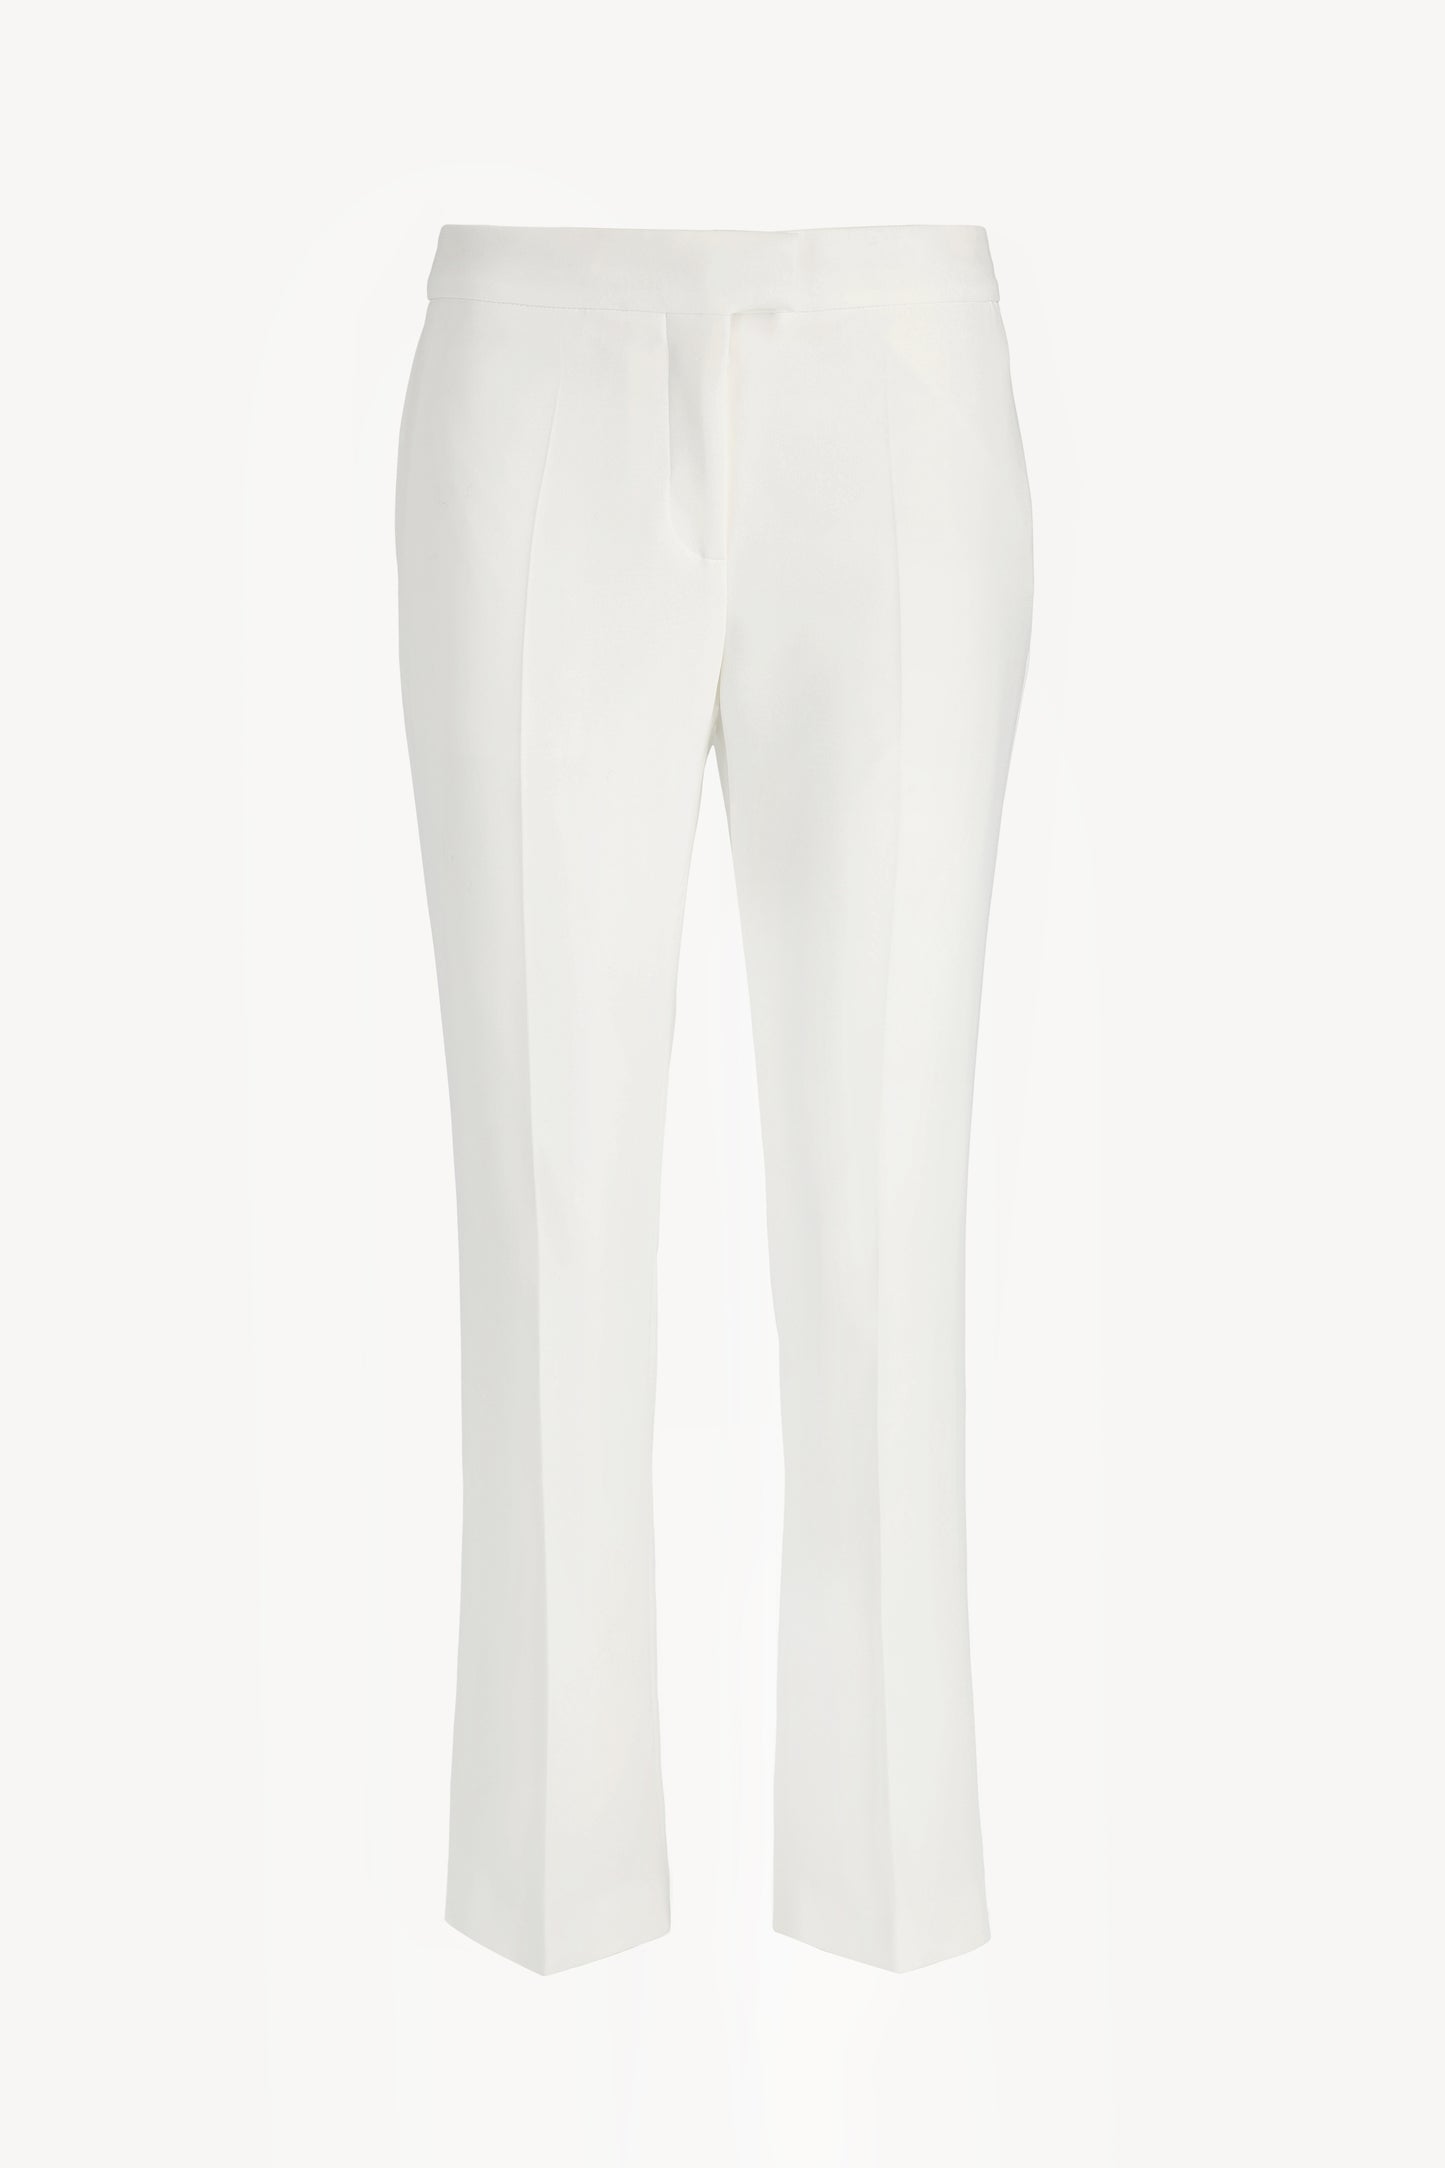 Todd trousers in Optic White